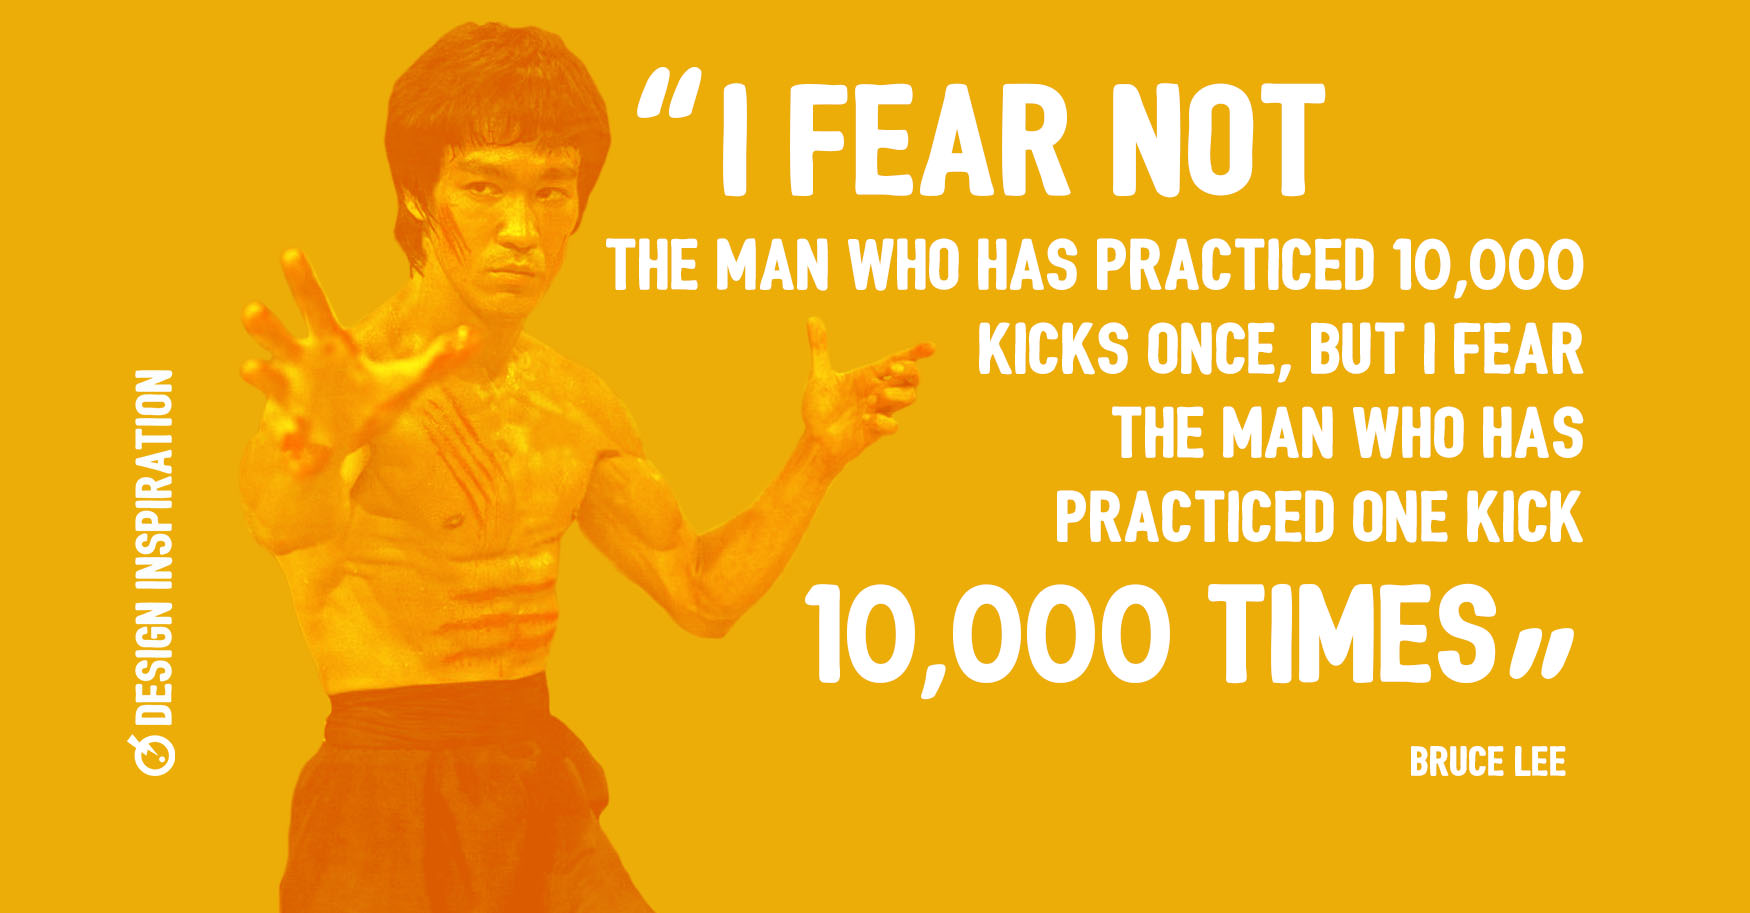 Bruce Lee quotes that will transform your business